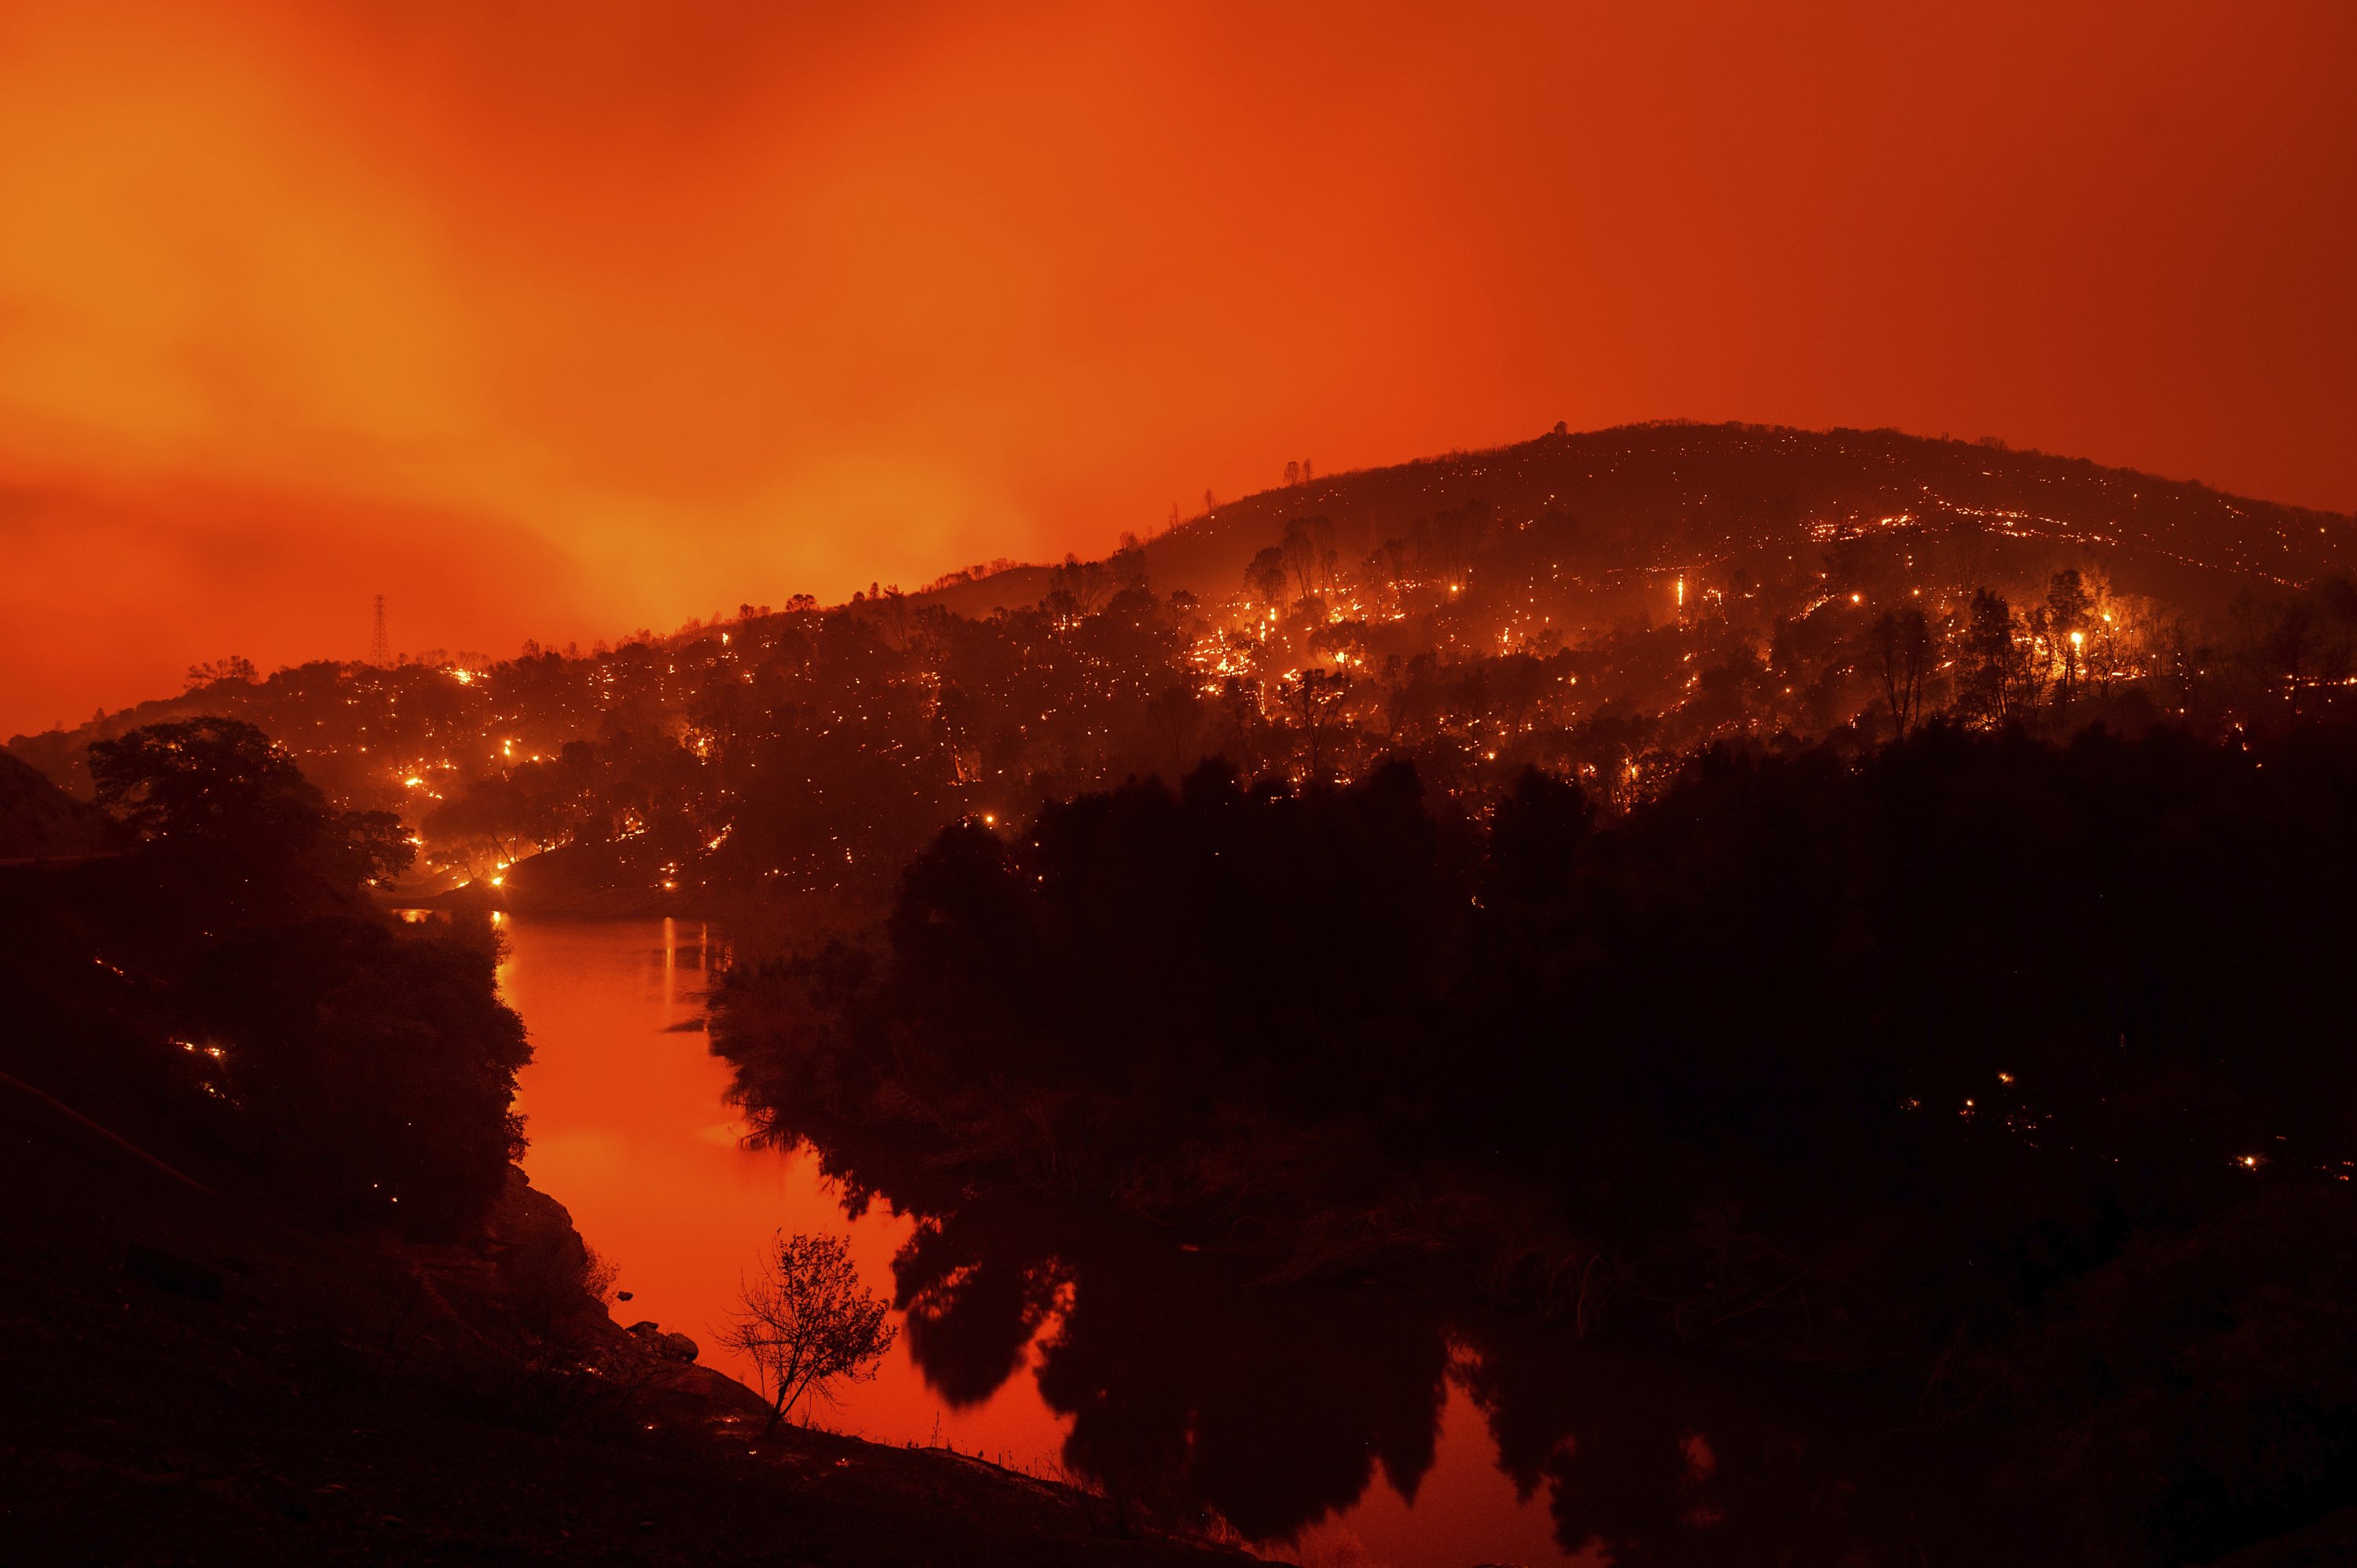 Lightning-sparked fires rage across California, tens of thousands flee ...